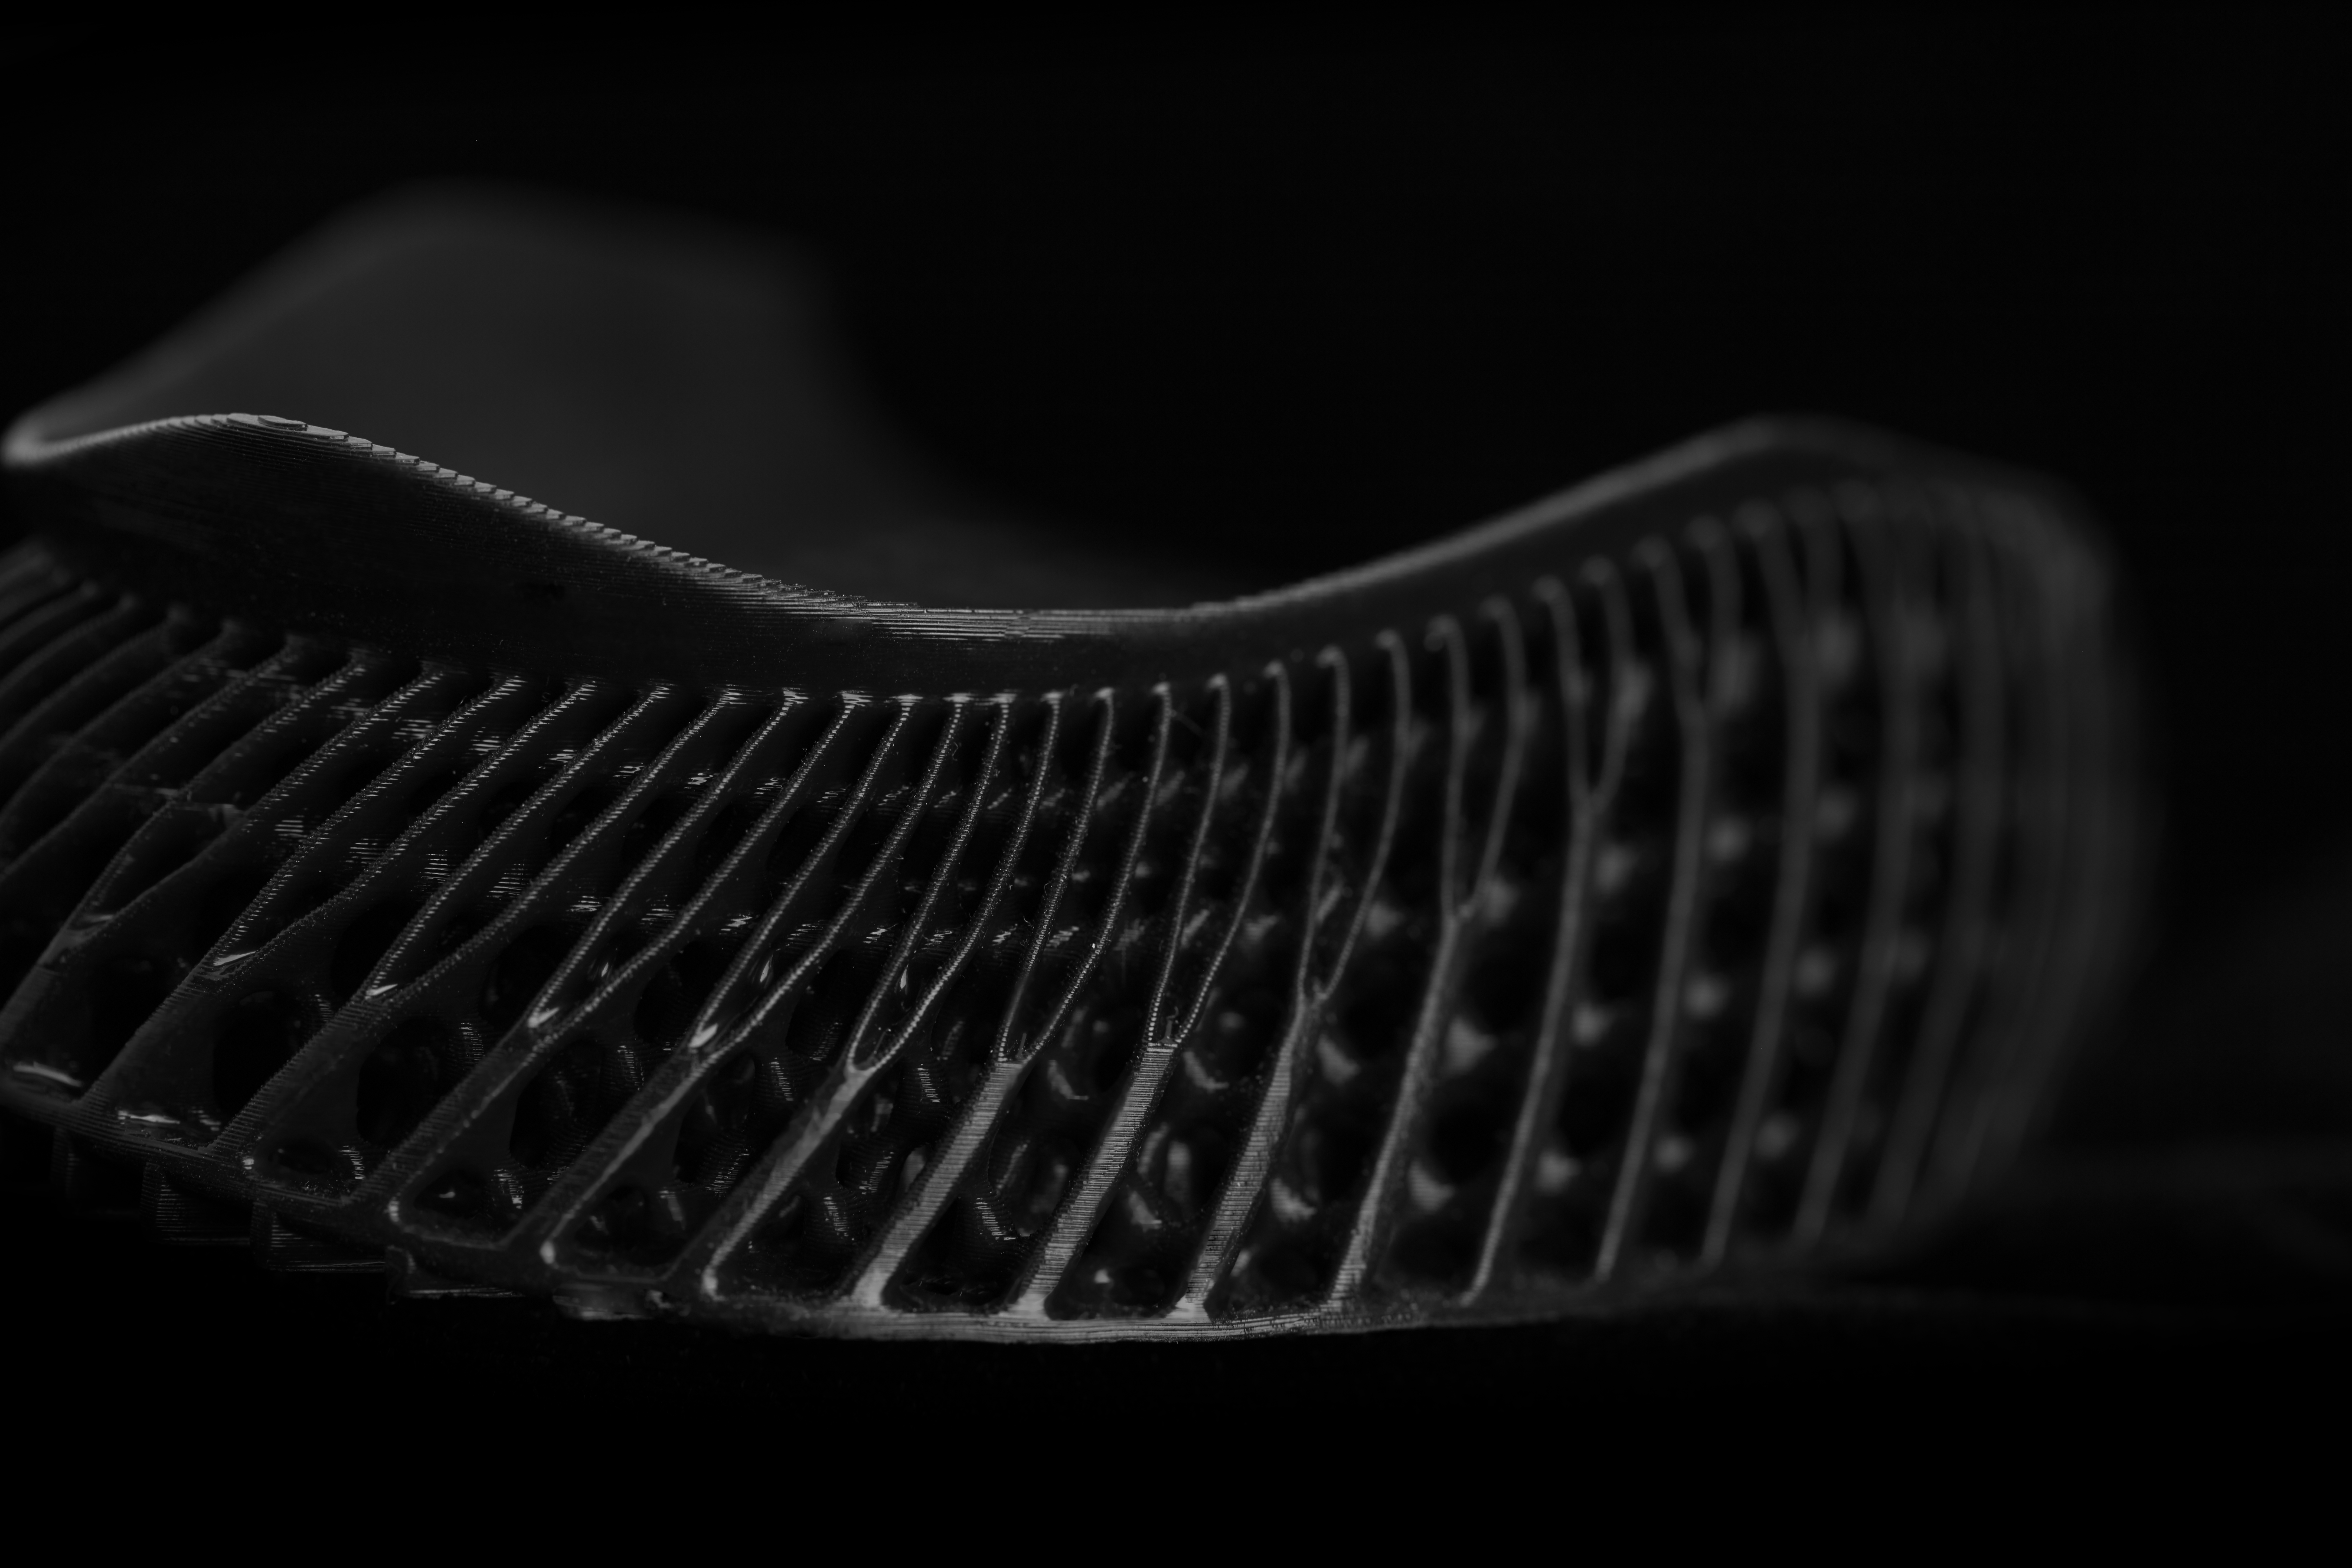 New Balance soles 3D printed on Formlabs machines. Image via Formlabs